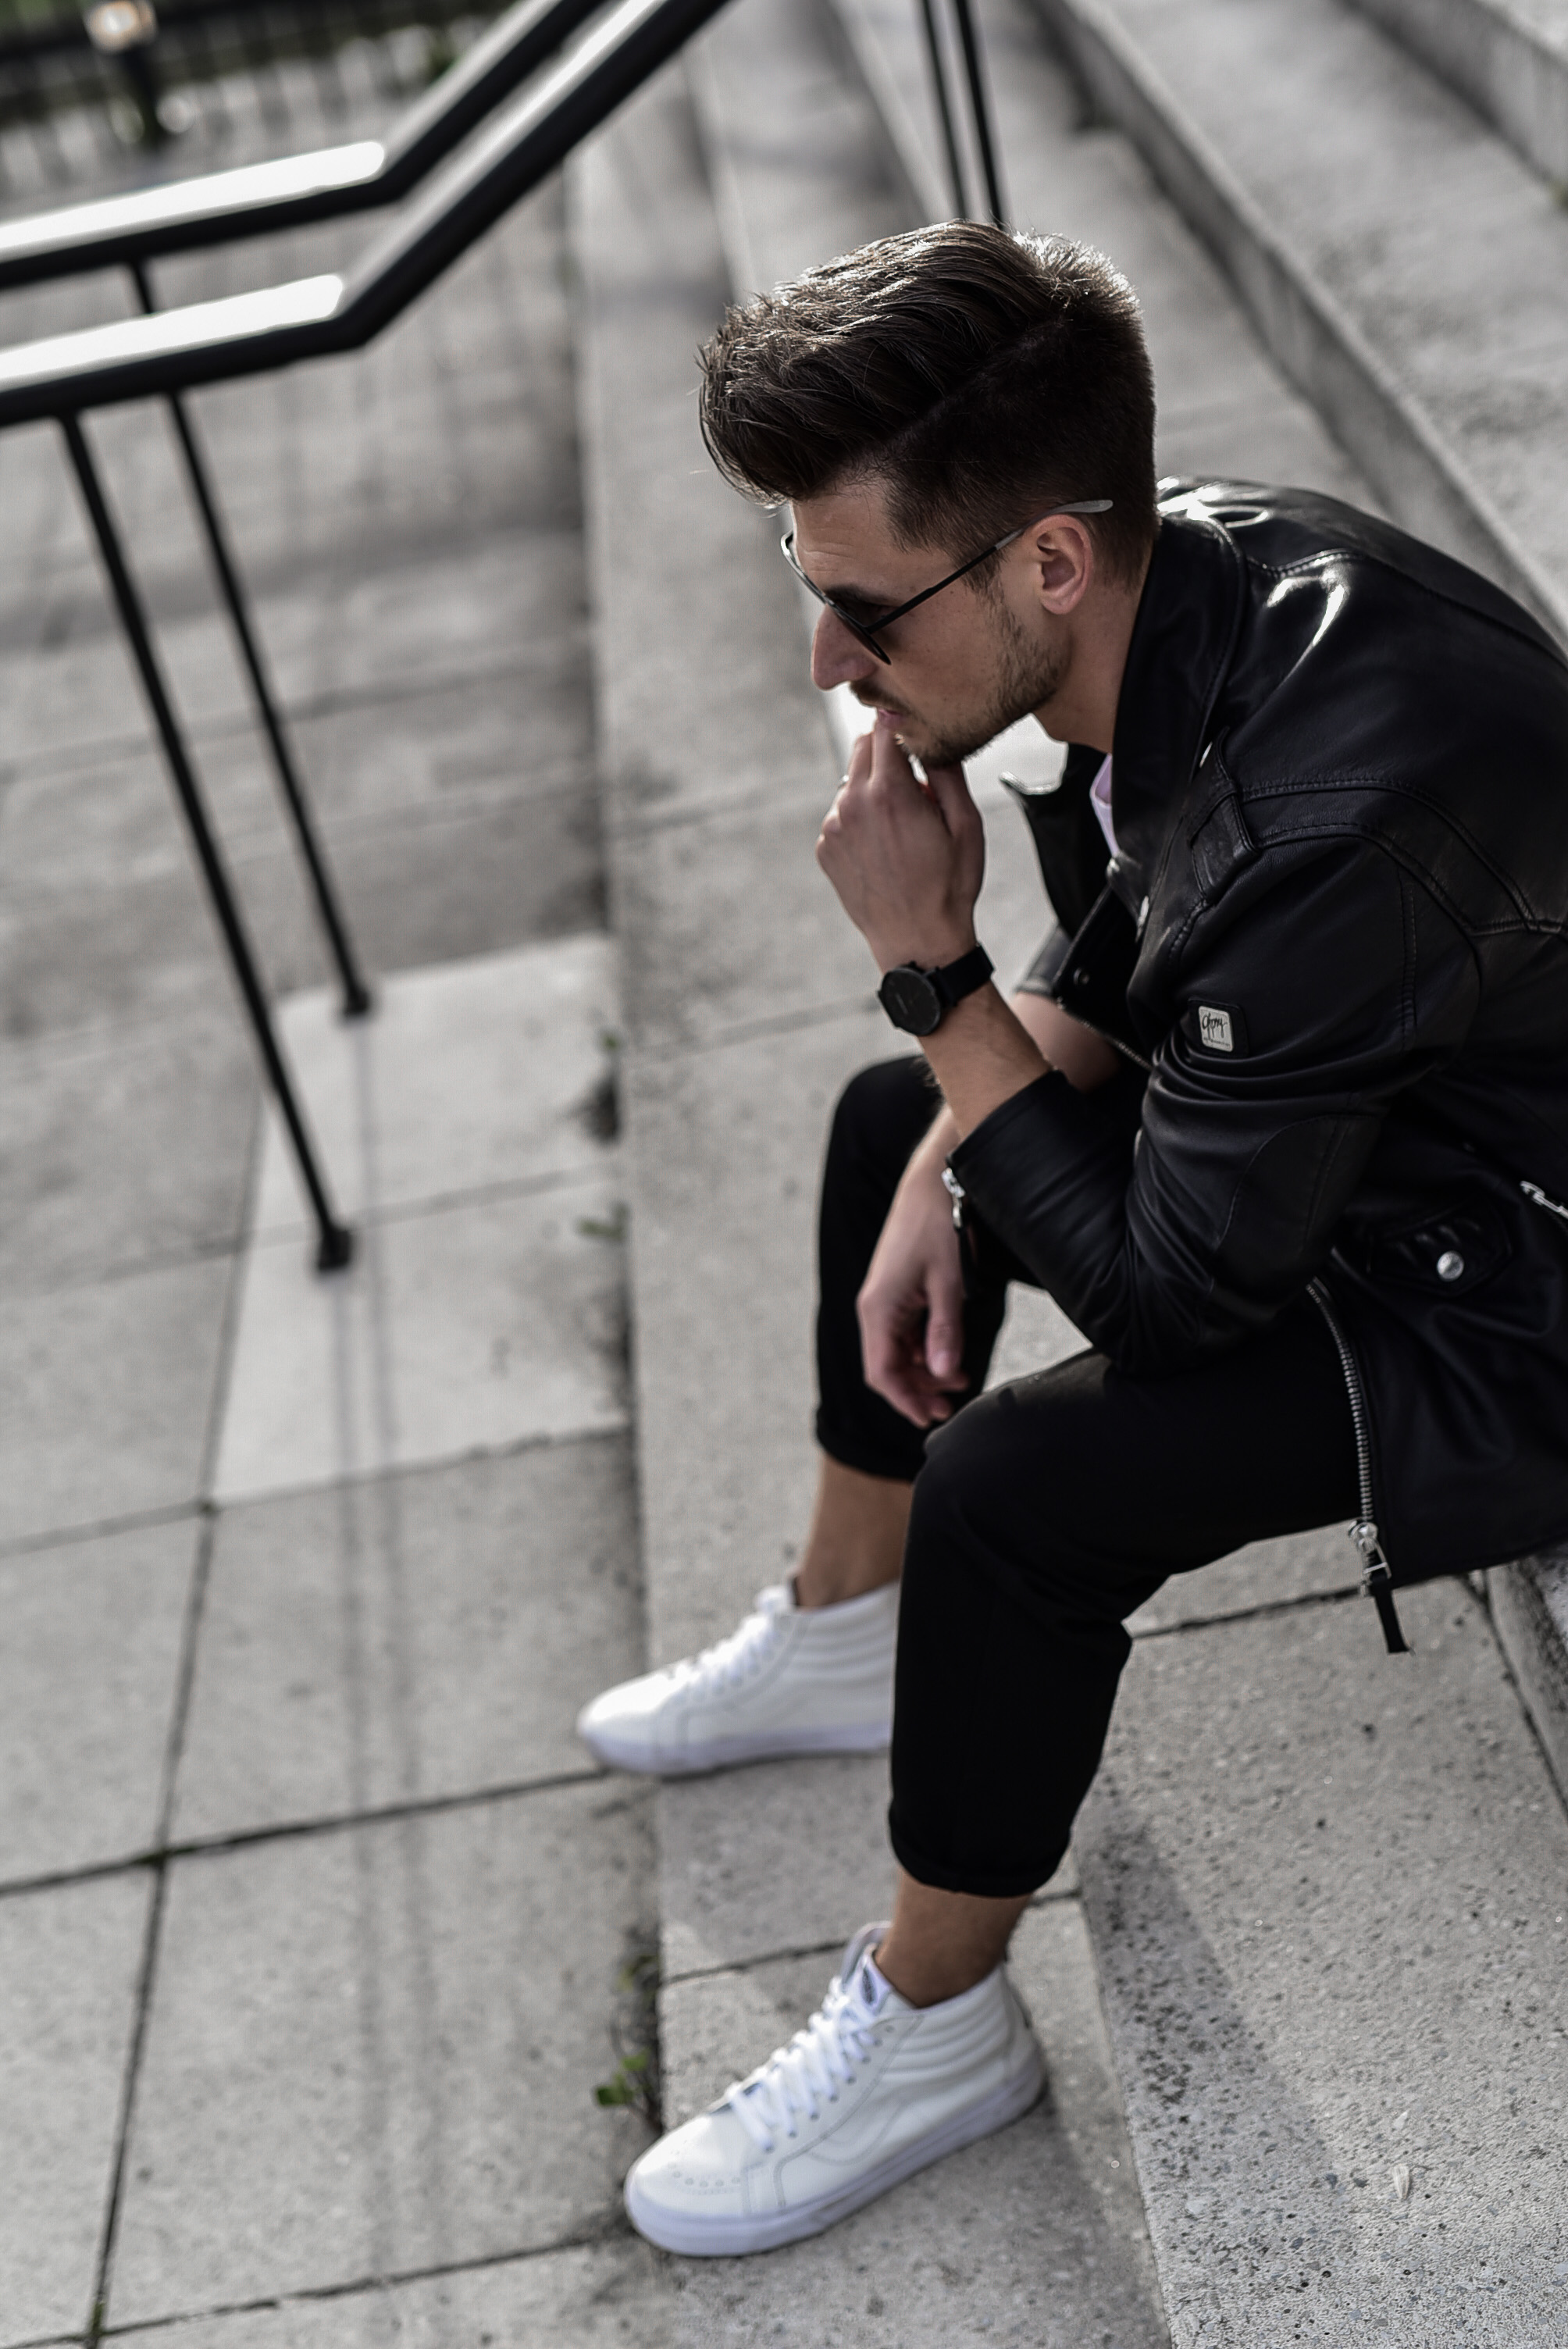 Tommeezjerry-Maennermodeblog-Maennermode-Fashionblog-Styleblog-Berlinblog-soliver-the-fusion-collection-casual-streetstyle-jogger-suit